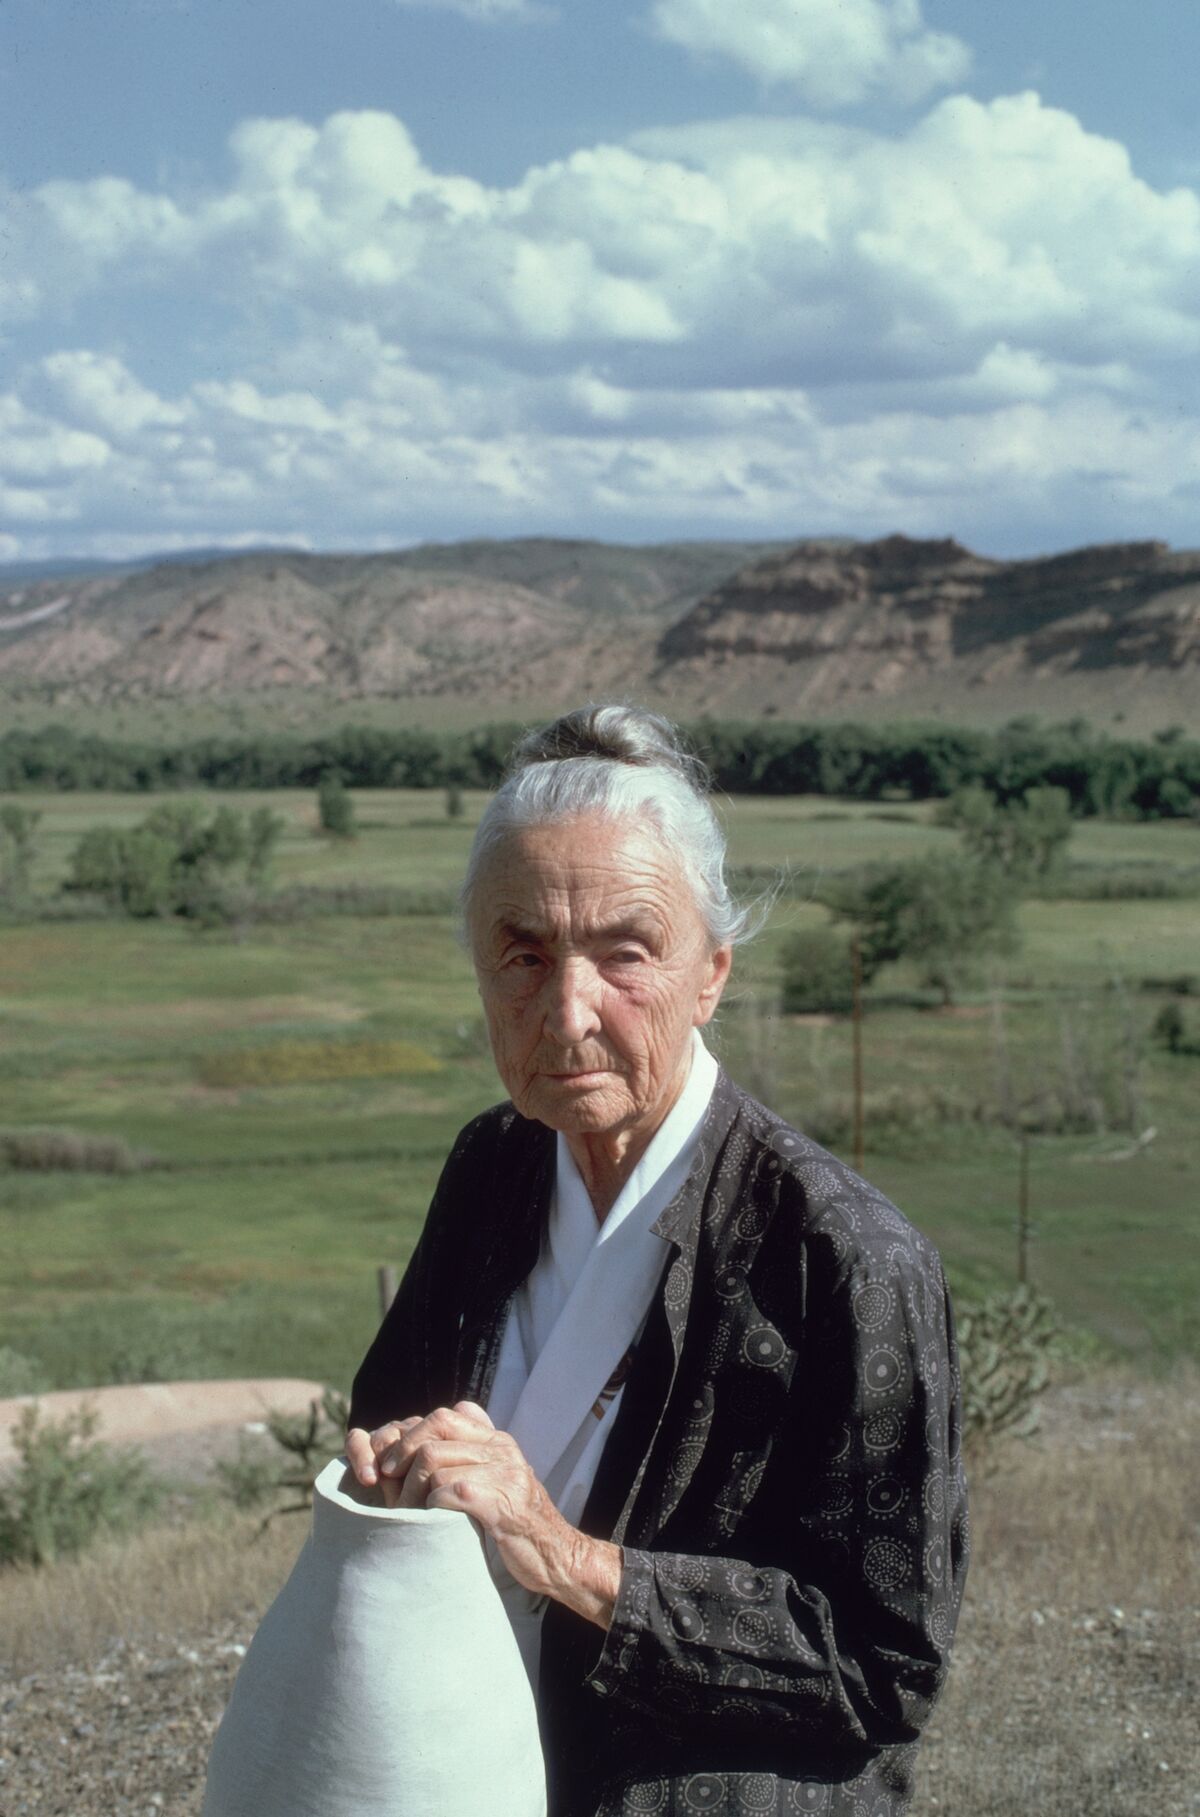 Portrait of Georgia O’Keeffe in Abiquiu, New Mexico, 1974. Photo by Joe Munroe/Hulton Archive/Getty Images.